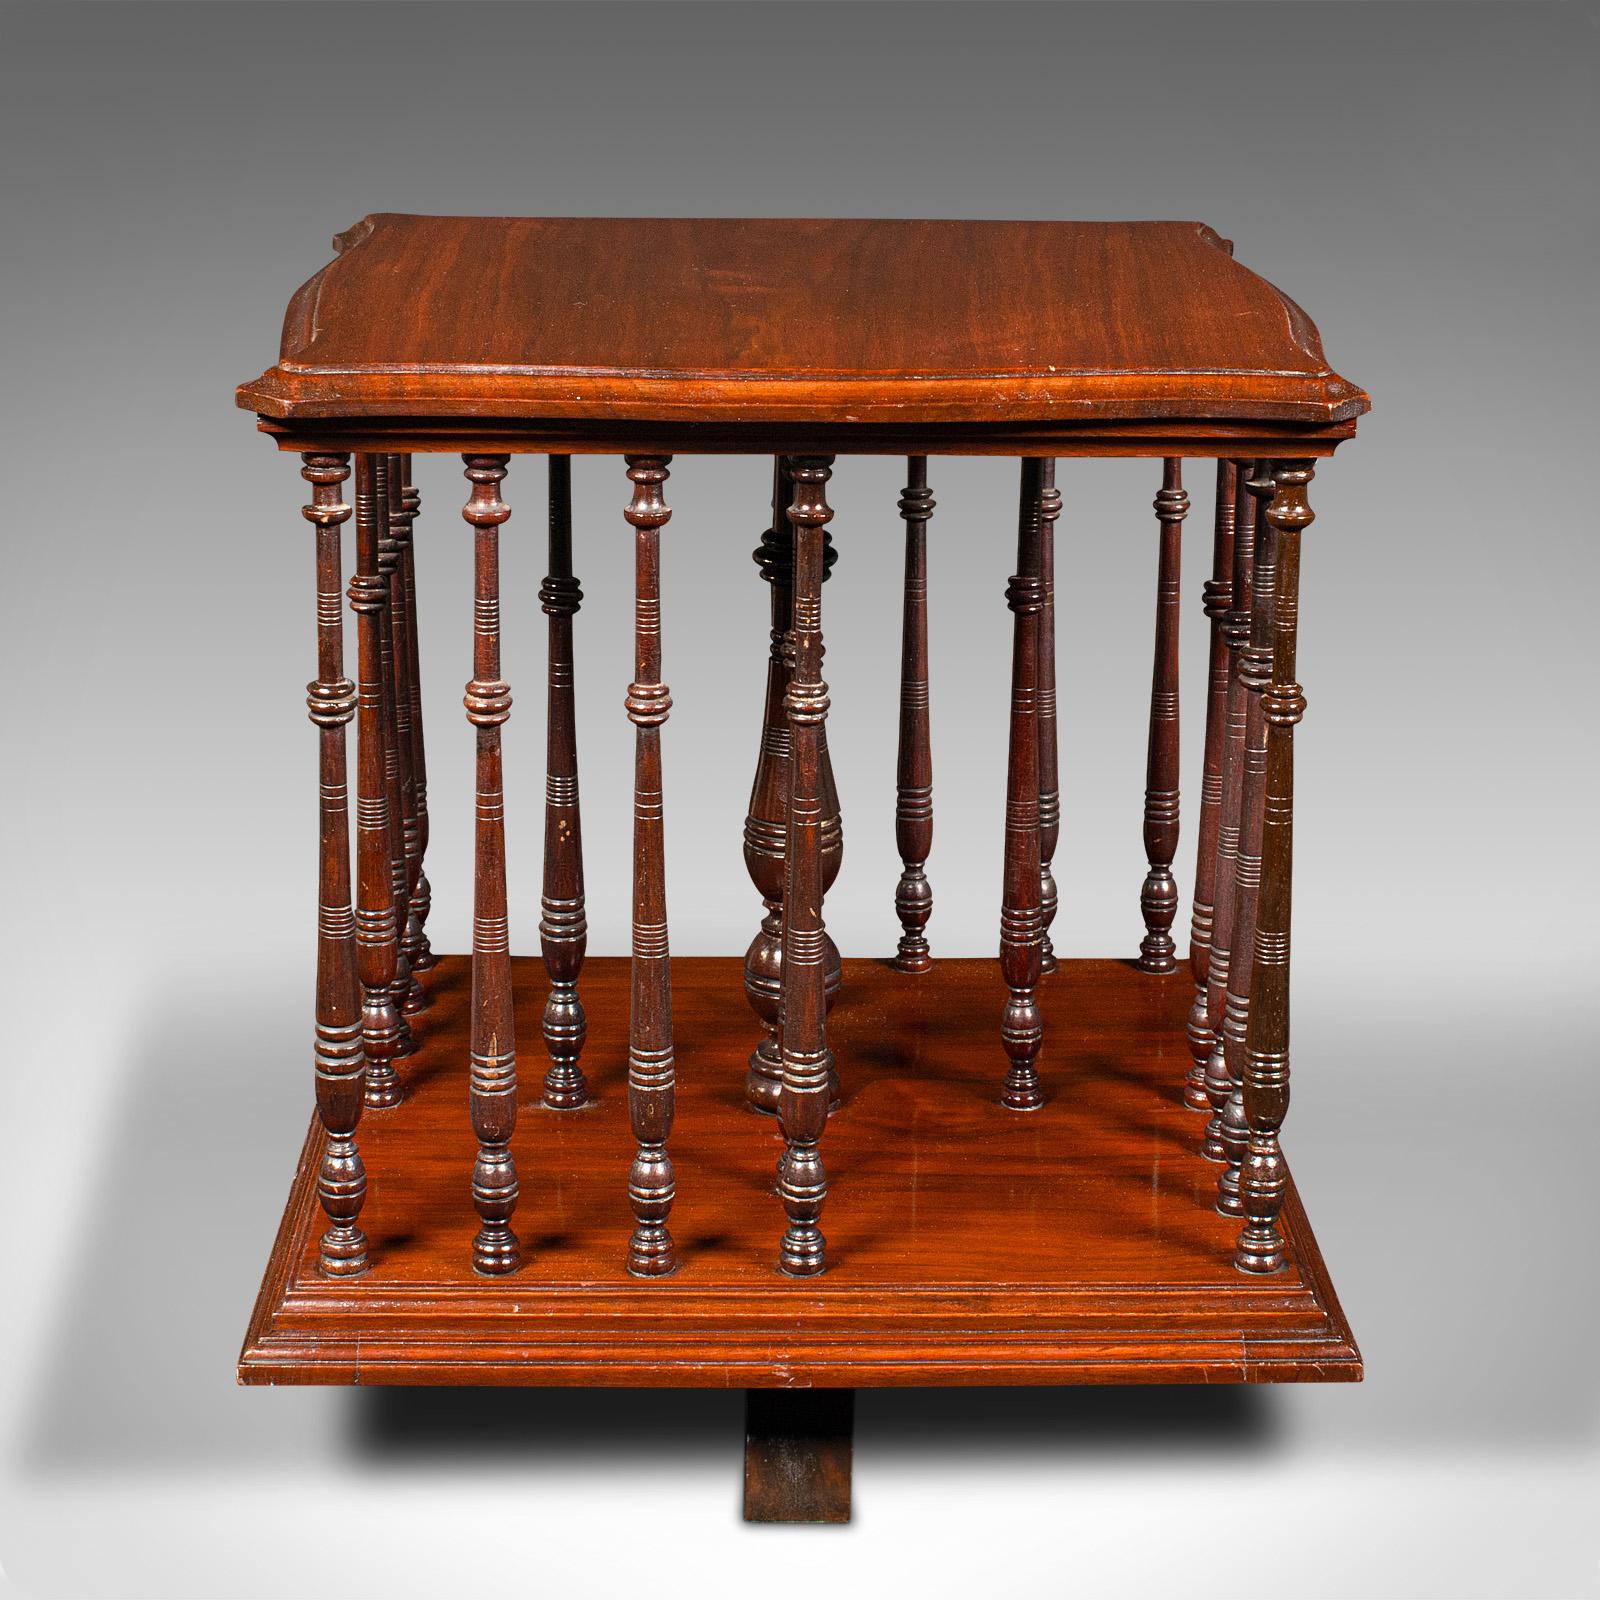 This is an antique book companion. An English, walnut rotary bookstand, dating to the Edwardian period, circa 1910.

Beautifully crafted stand with skilfully turned detail
Displays a desirable aged patina and in good order
Select walnut stocks